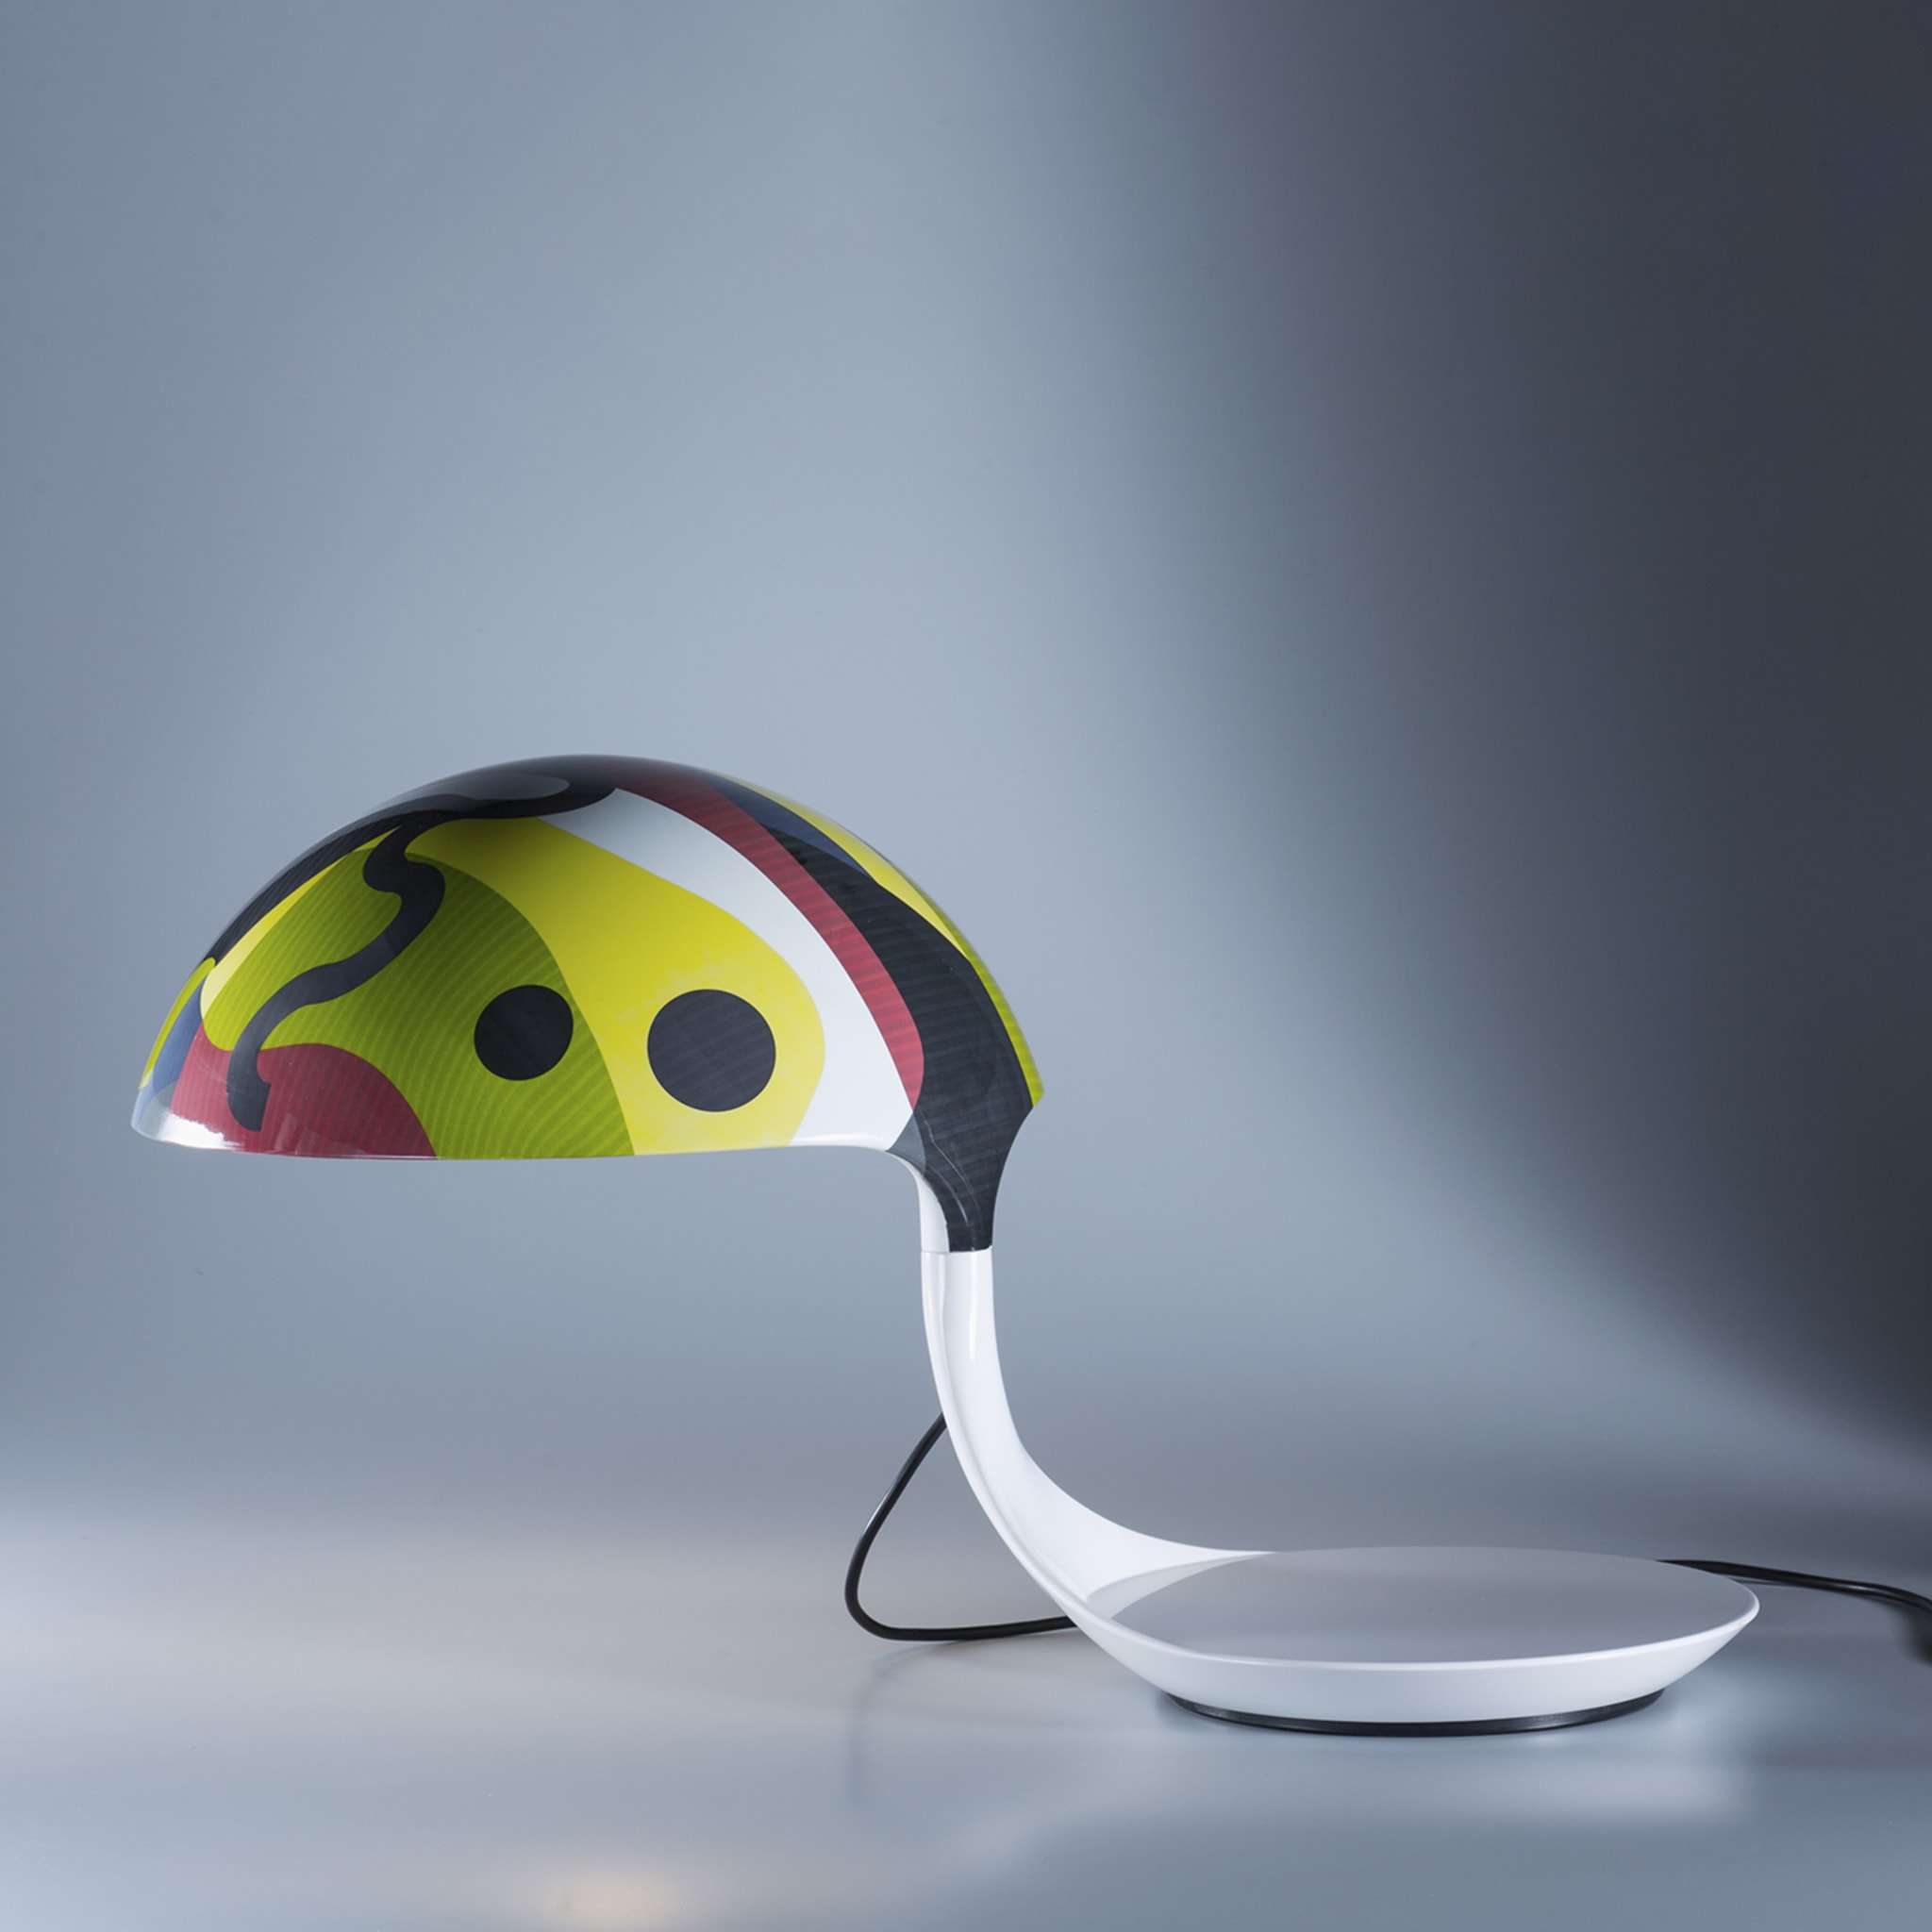 Cobra Texture Polychrome Table Lamp by Alessandro Guerriero - Alternative view 2